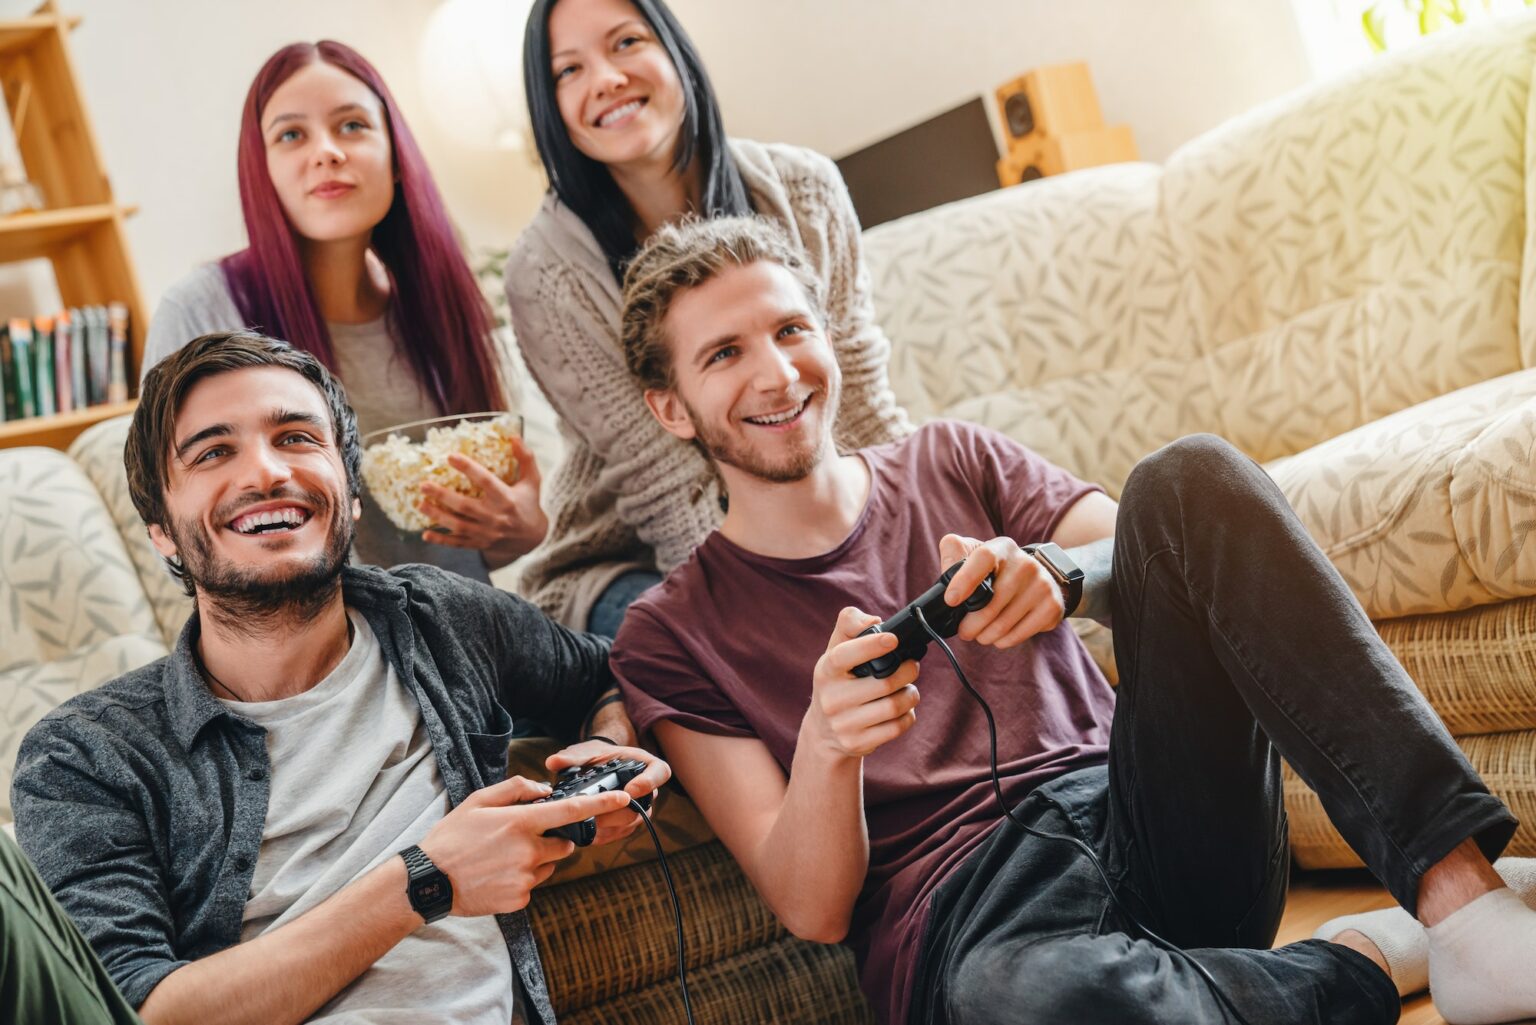 Group of friends playing video games together at home